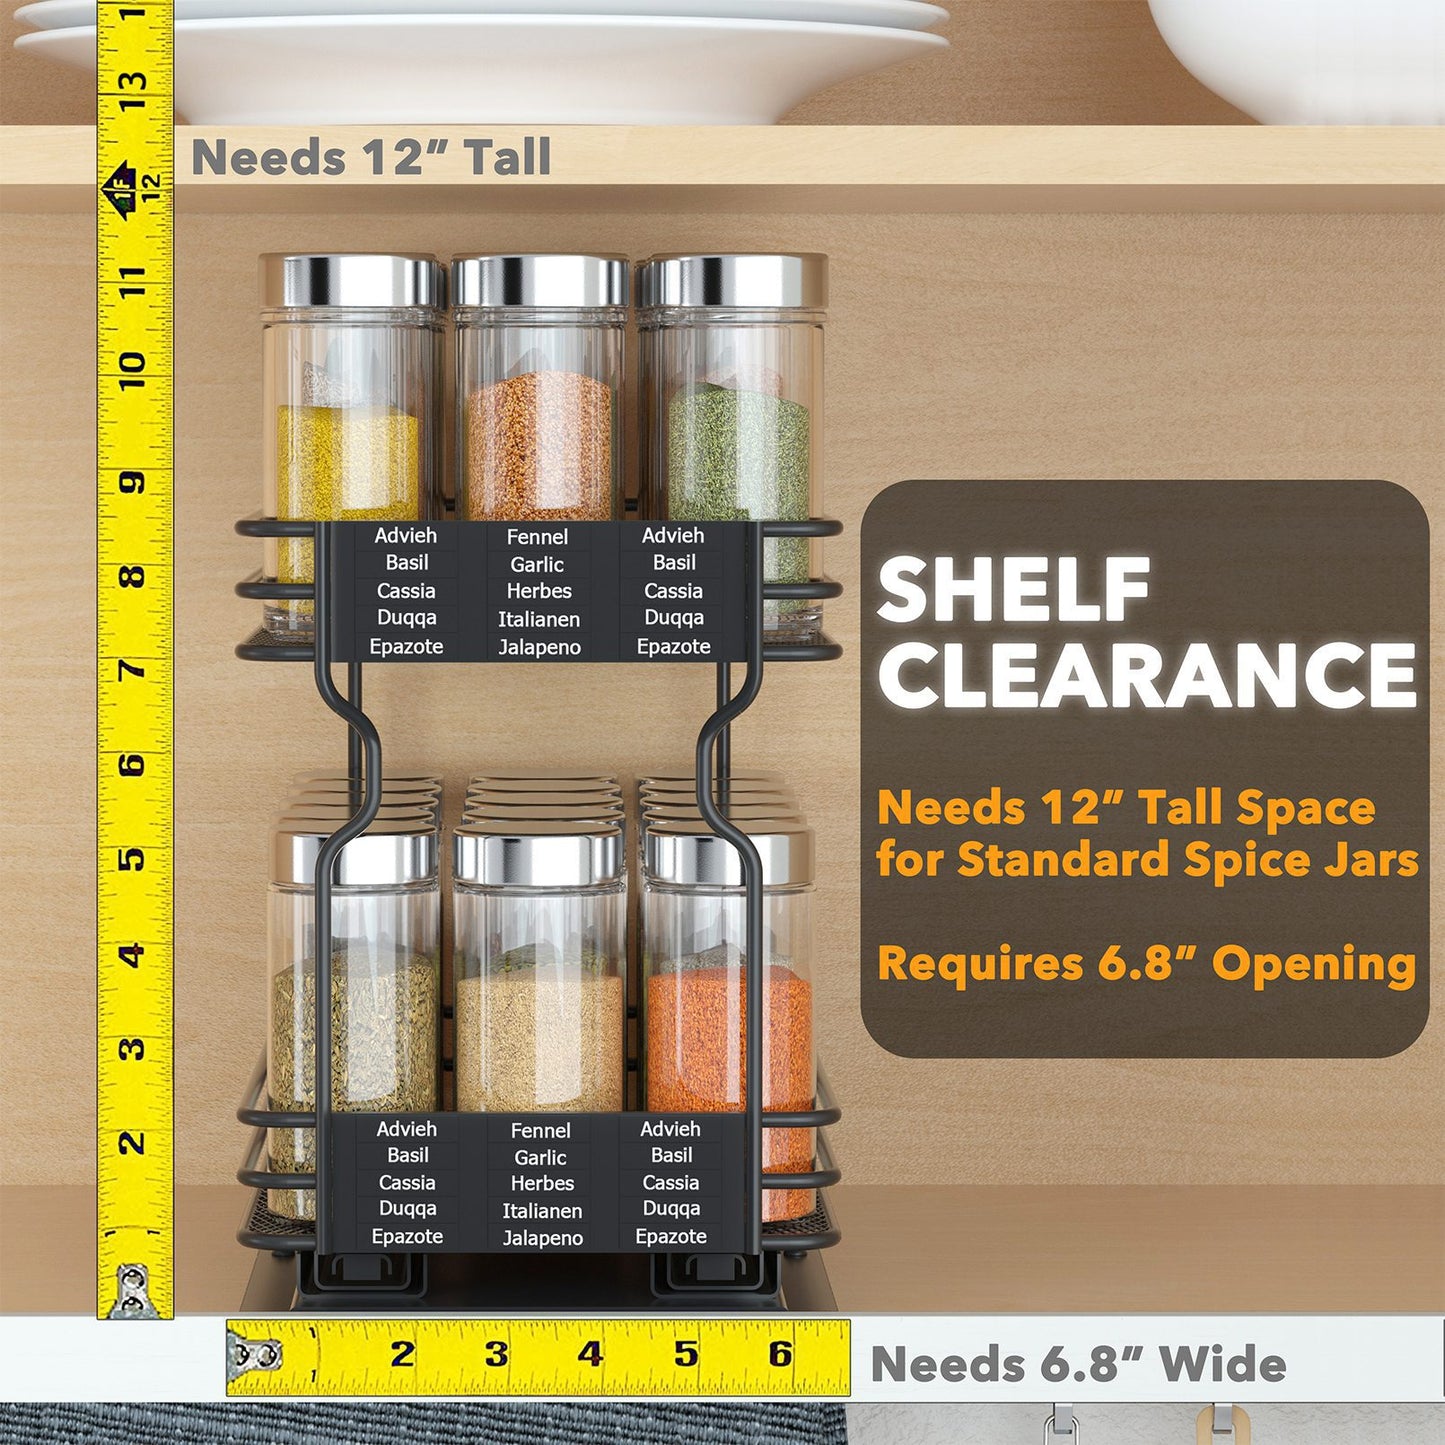 SpaceAid Slide Out Spice Rack Organizer for Kitchen Cabinet with Labels and Chalk Marker, 1 Drawer 2-Tier